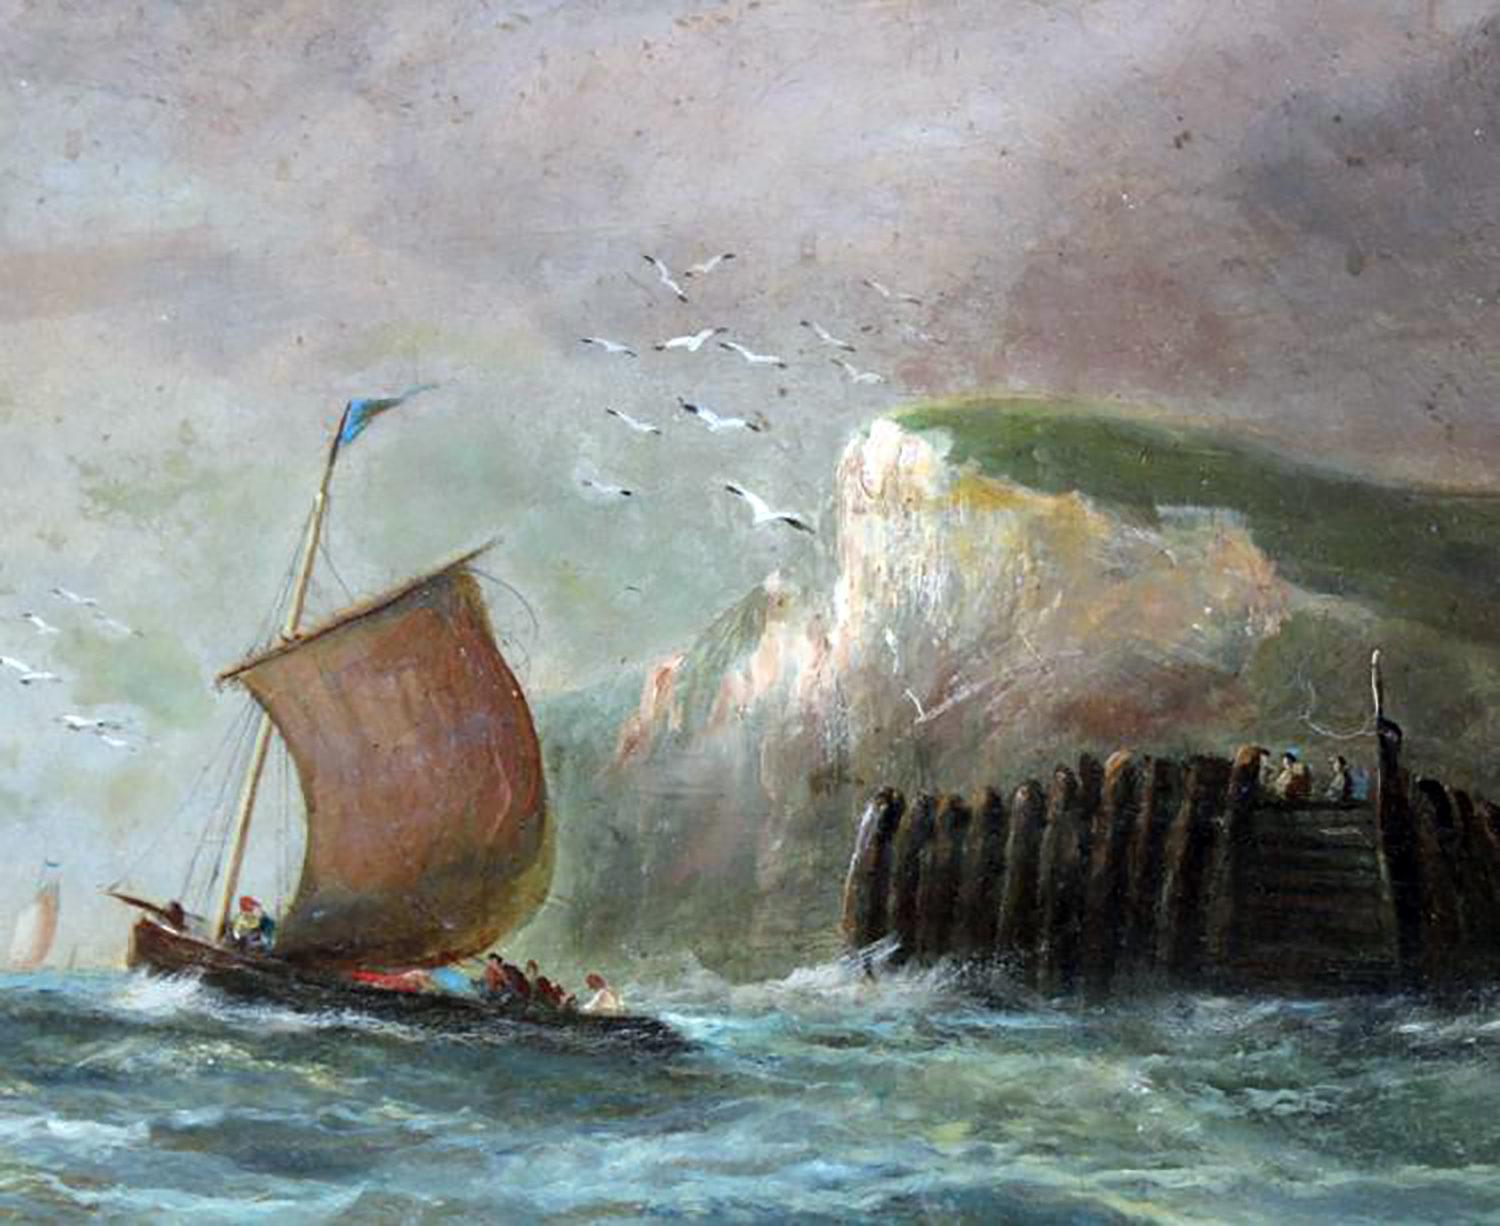 Large antique Dutch marine / seascape oil painting  Oil on Canvas  Depicts a beautiful scene with white cliffs and sailing ships  Appears to be unsigned  Capo auction label affixed to the frame attributes the painting to T. (Thomas) Lintott. Housed